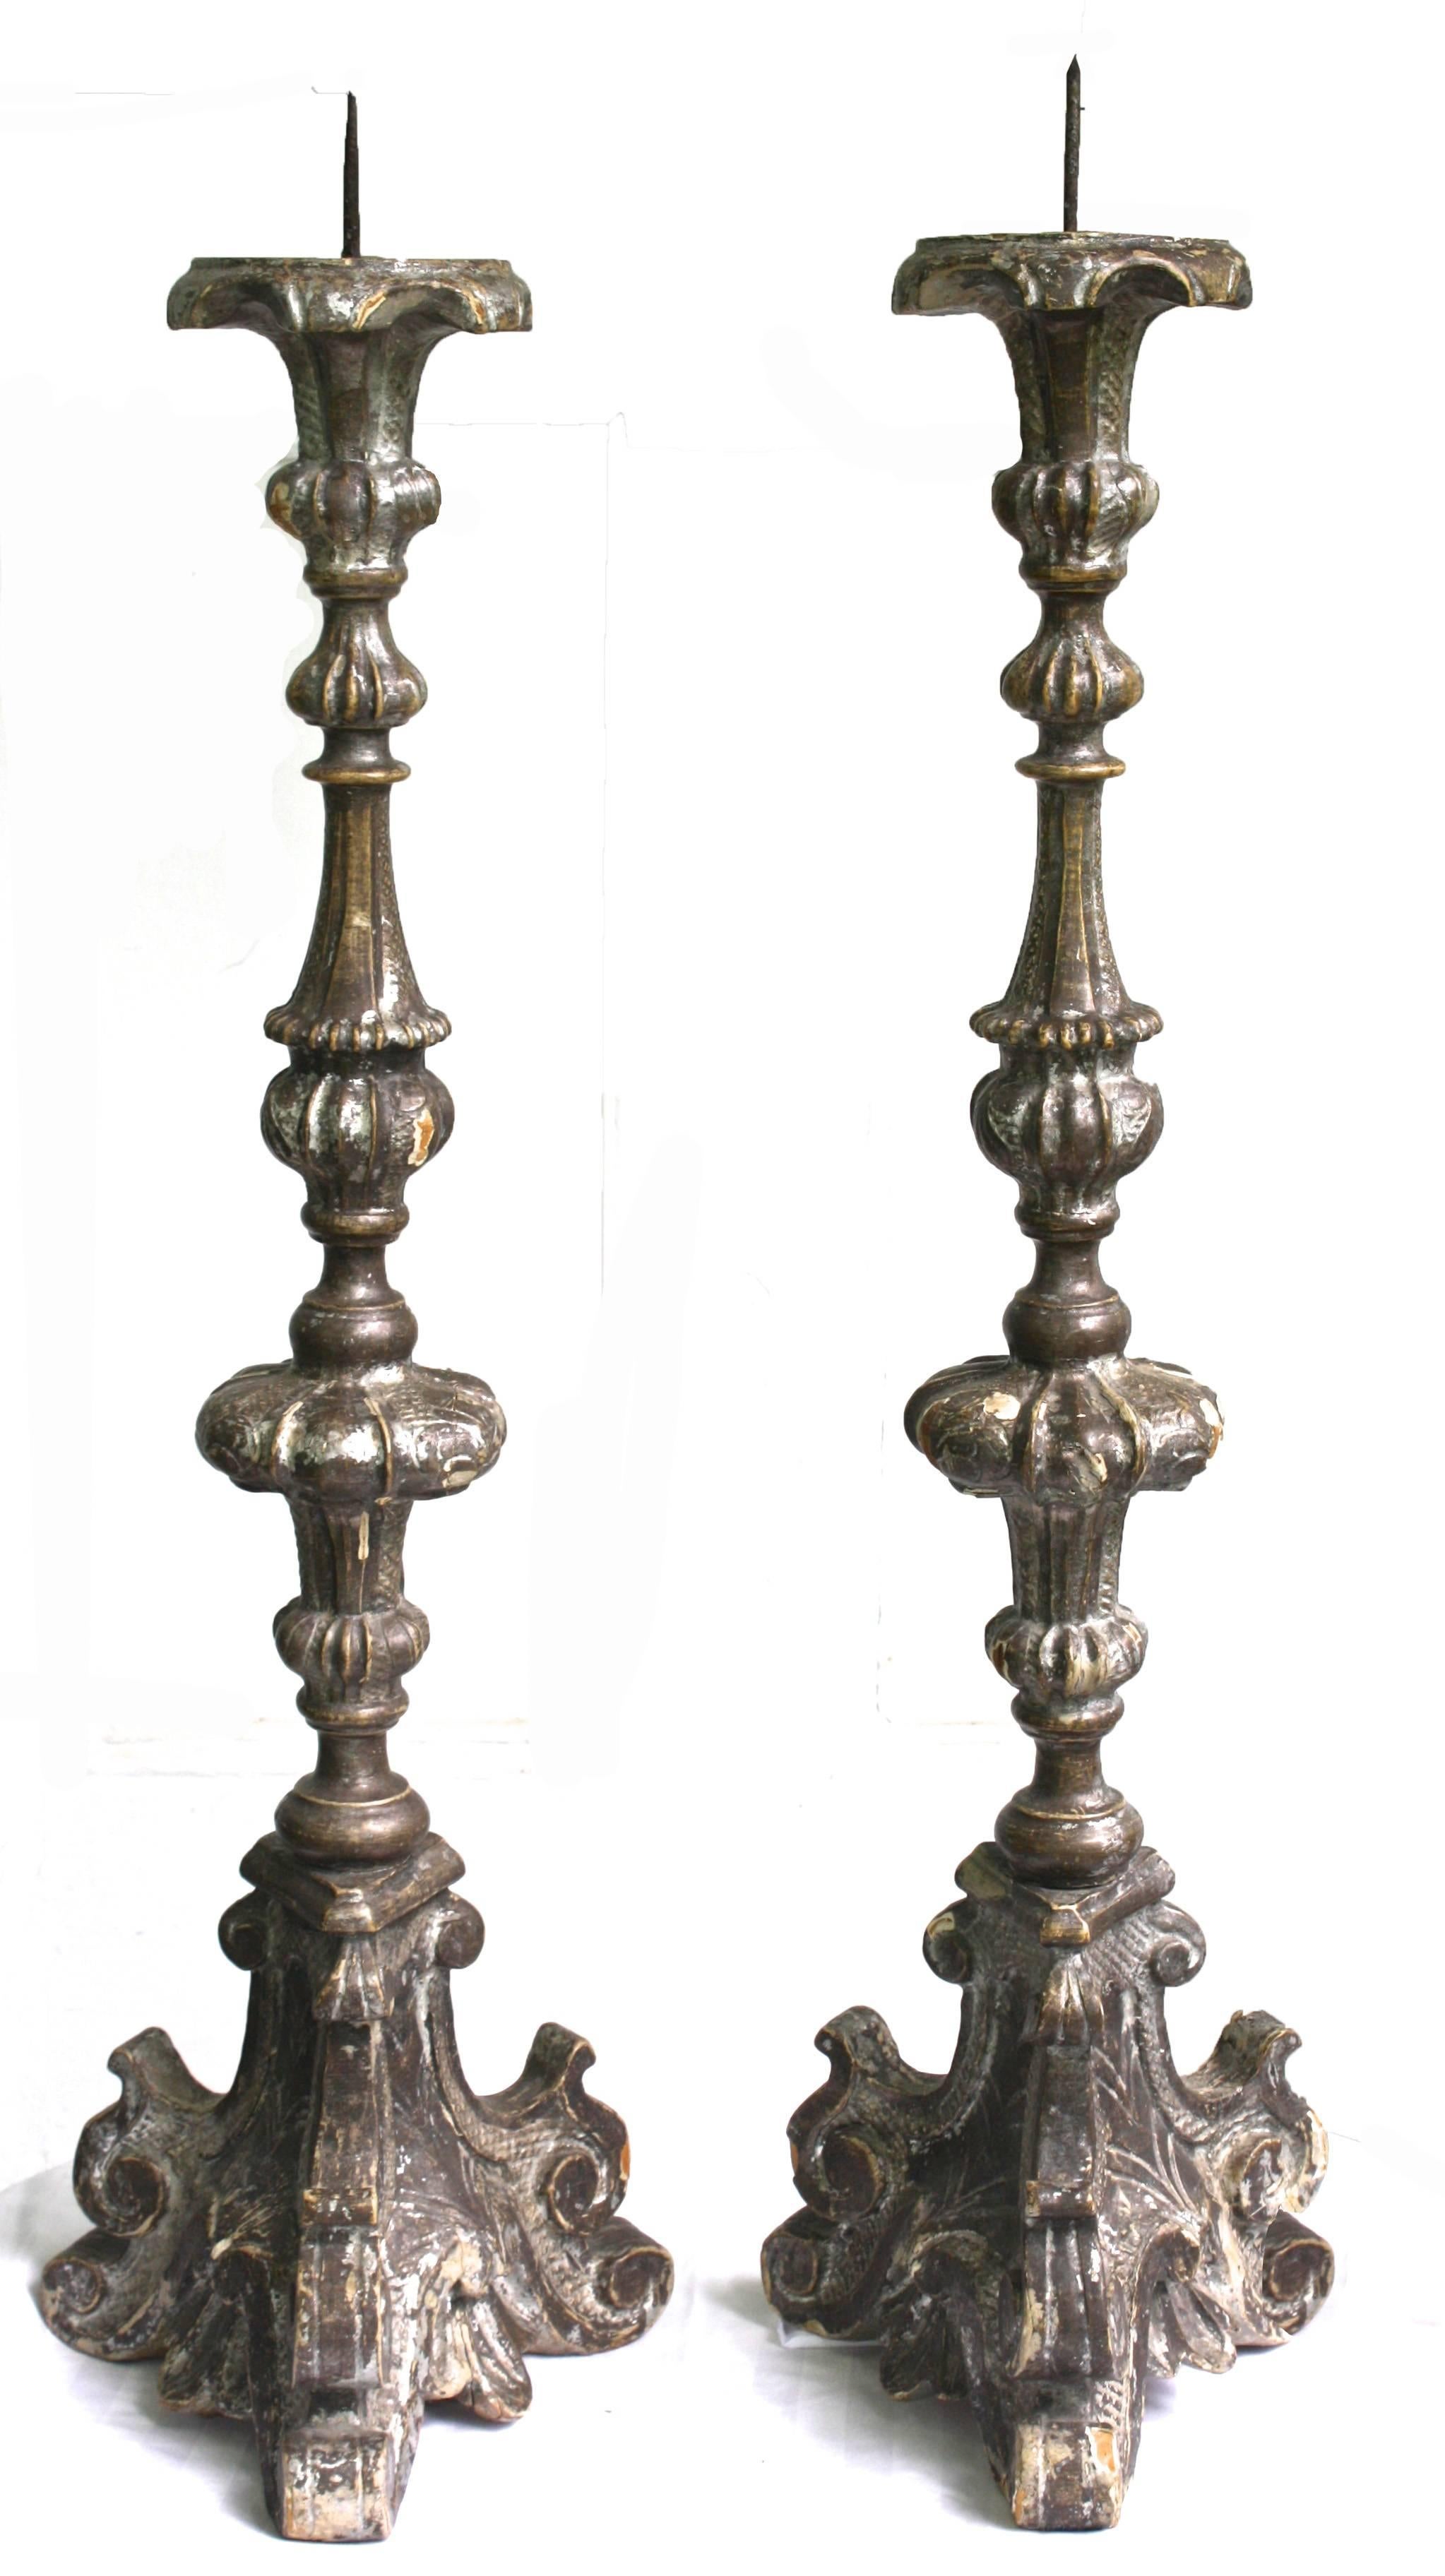 As closely matched as a hand-carved pair should be, these two appear to be of Florentine ecclesiastical origin and are proportionately sized for altar or tabletop placement.  Out of respect for age now approaching three hundred years, this 'period'